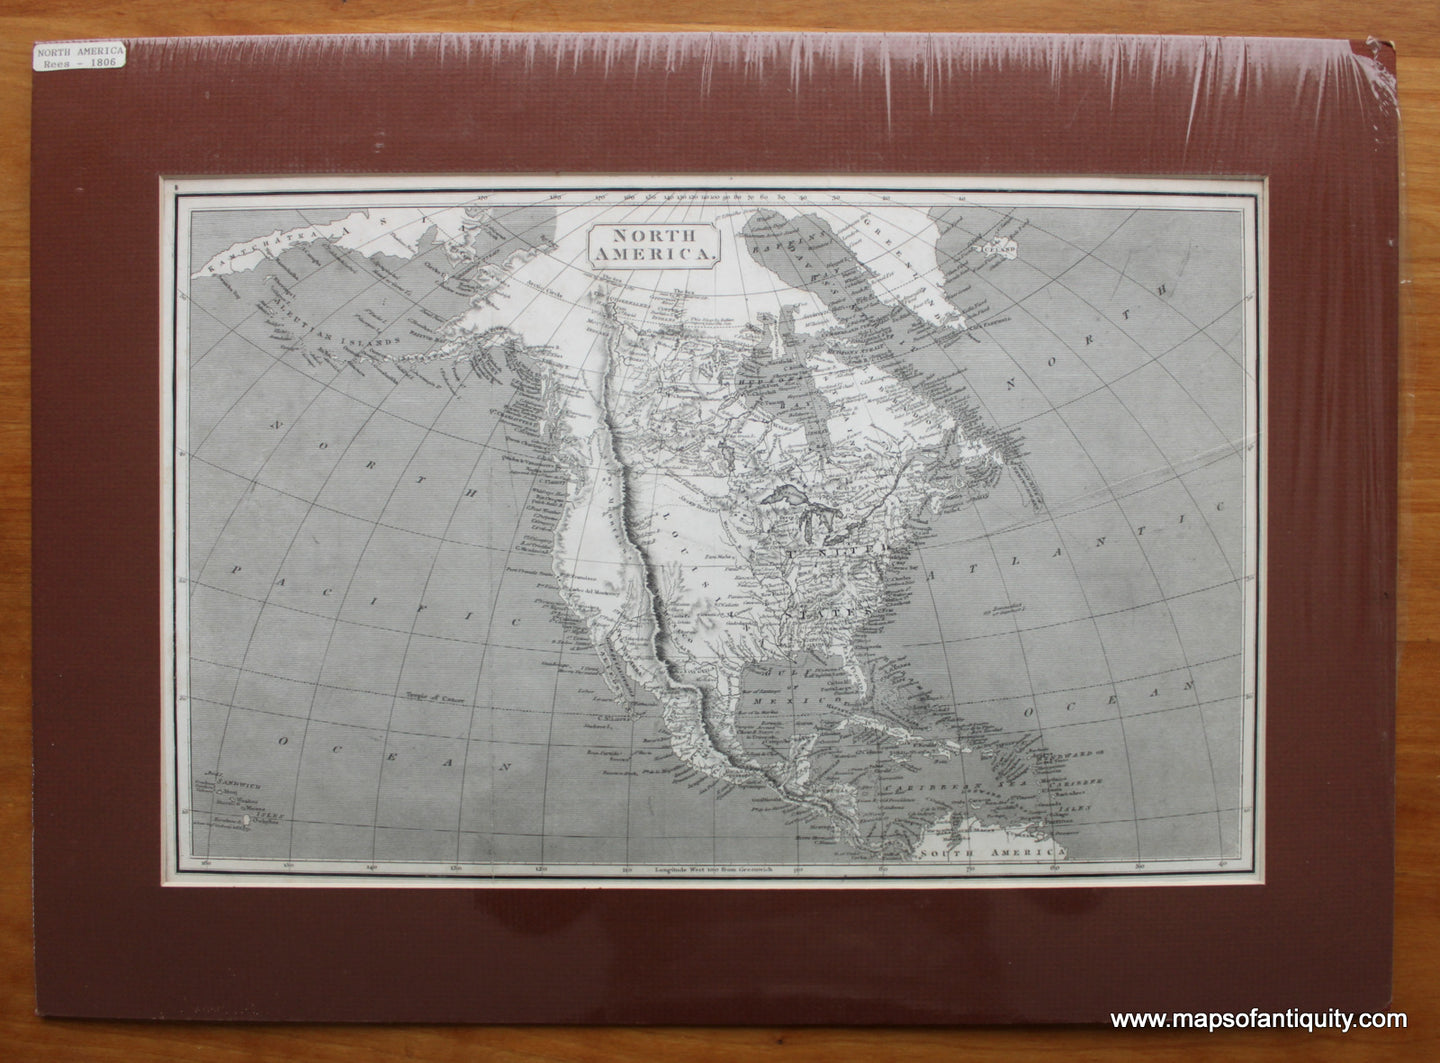 Antique-Black-and-White-Map-North-America-North-America-North-America-General-1806-Rees-Maps-Of-Antiquity